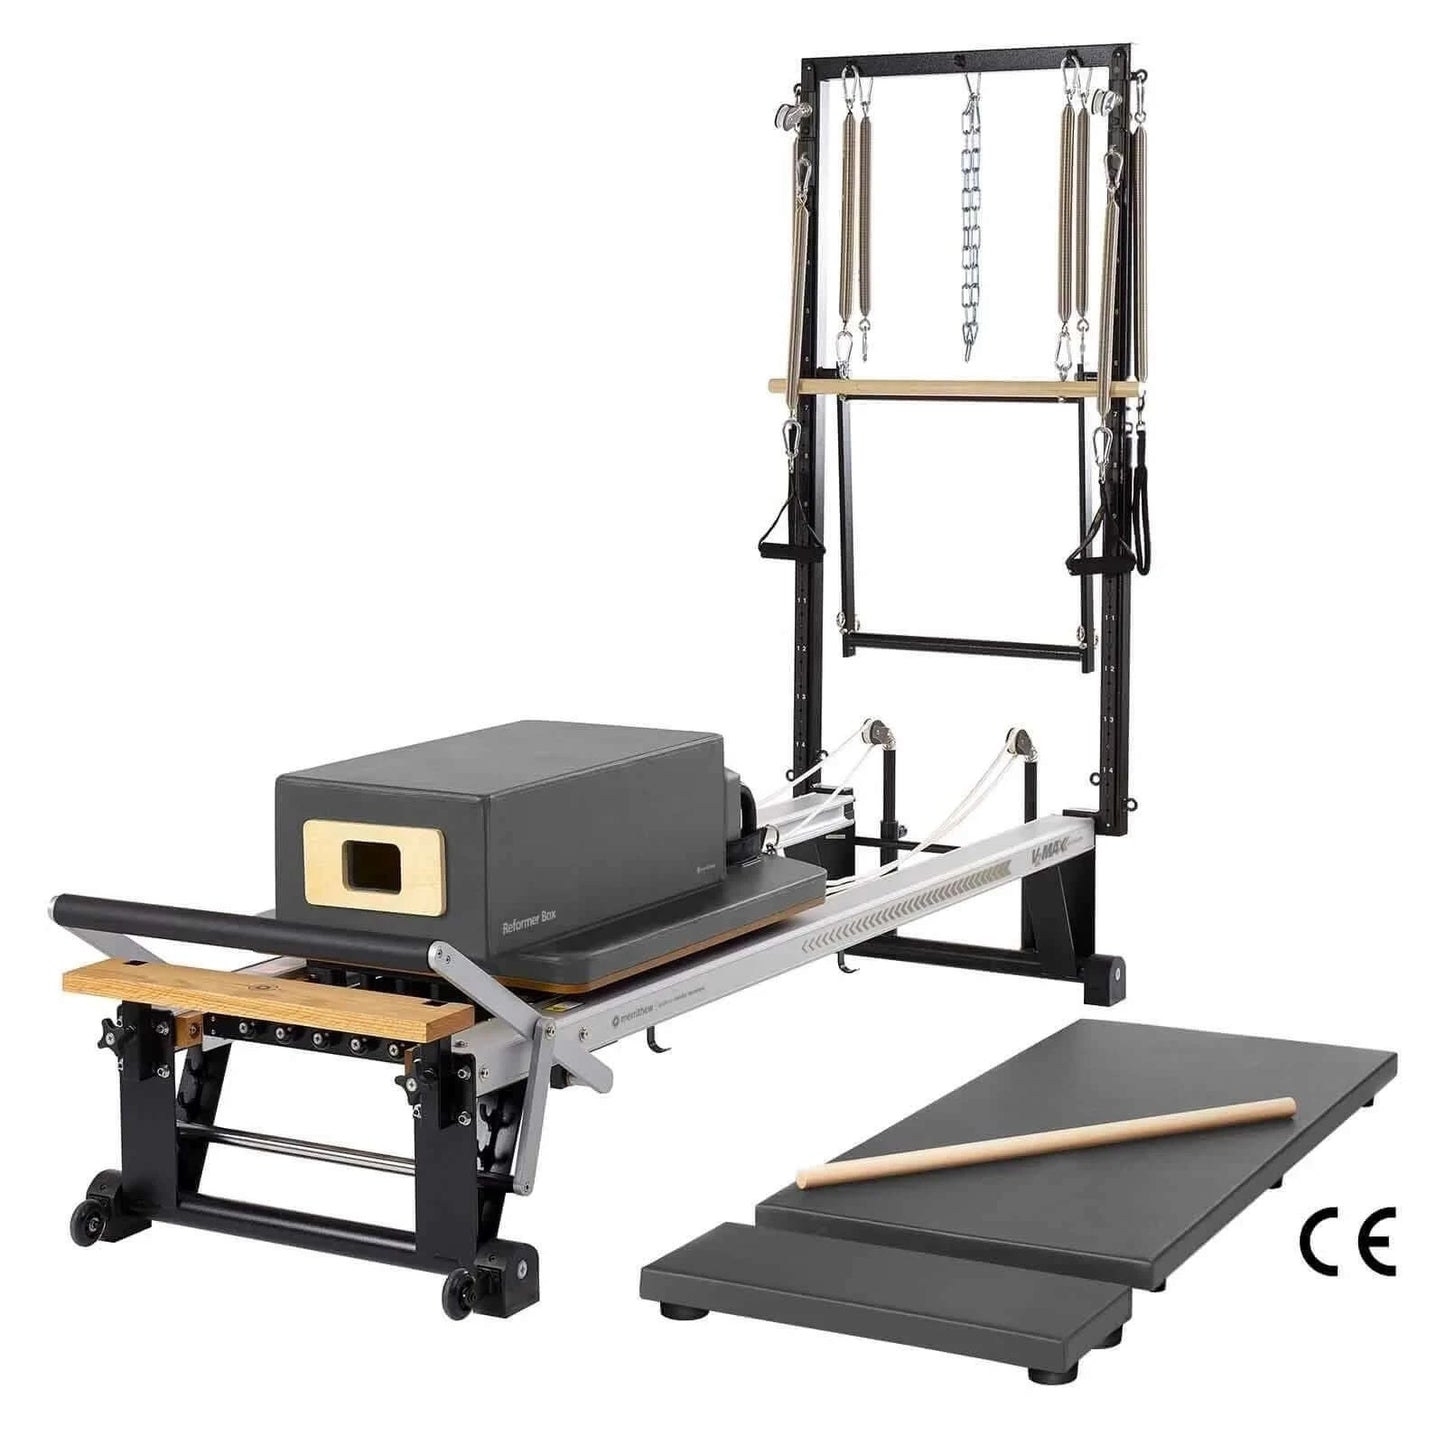 Gunmetal Gray Merrithew™ Pilates V2 Max Plus™ Reformer Bundle by Merrithew™ sold by Pilates Matters® by BSP LLC